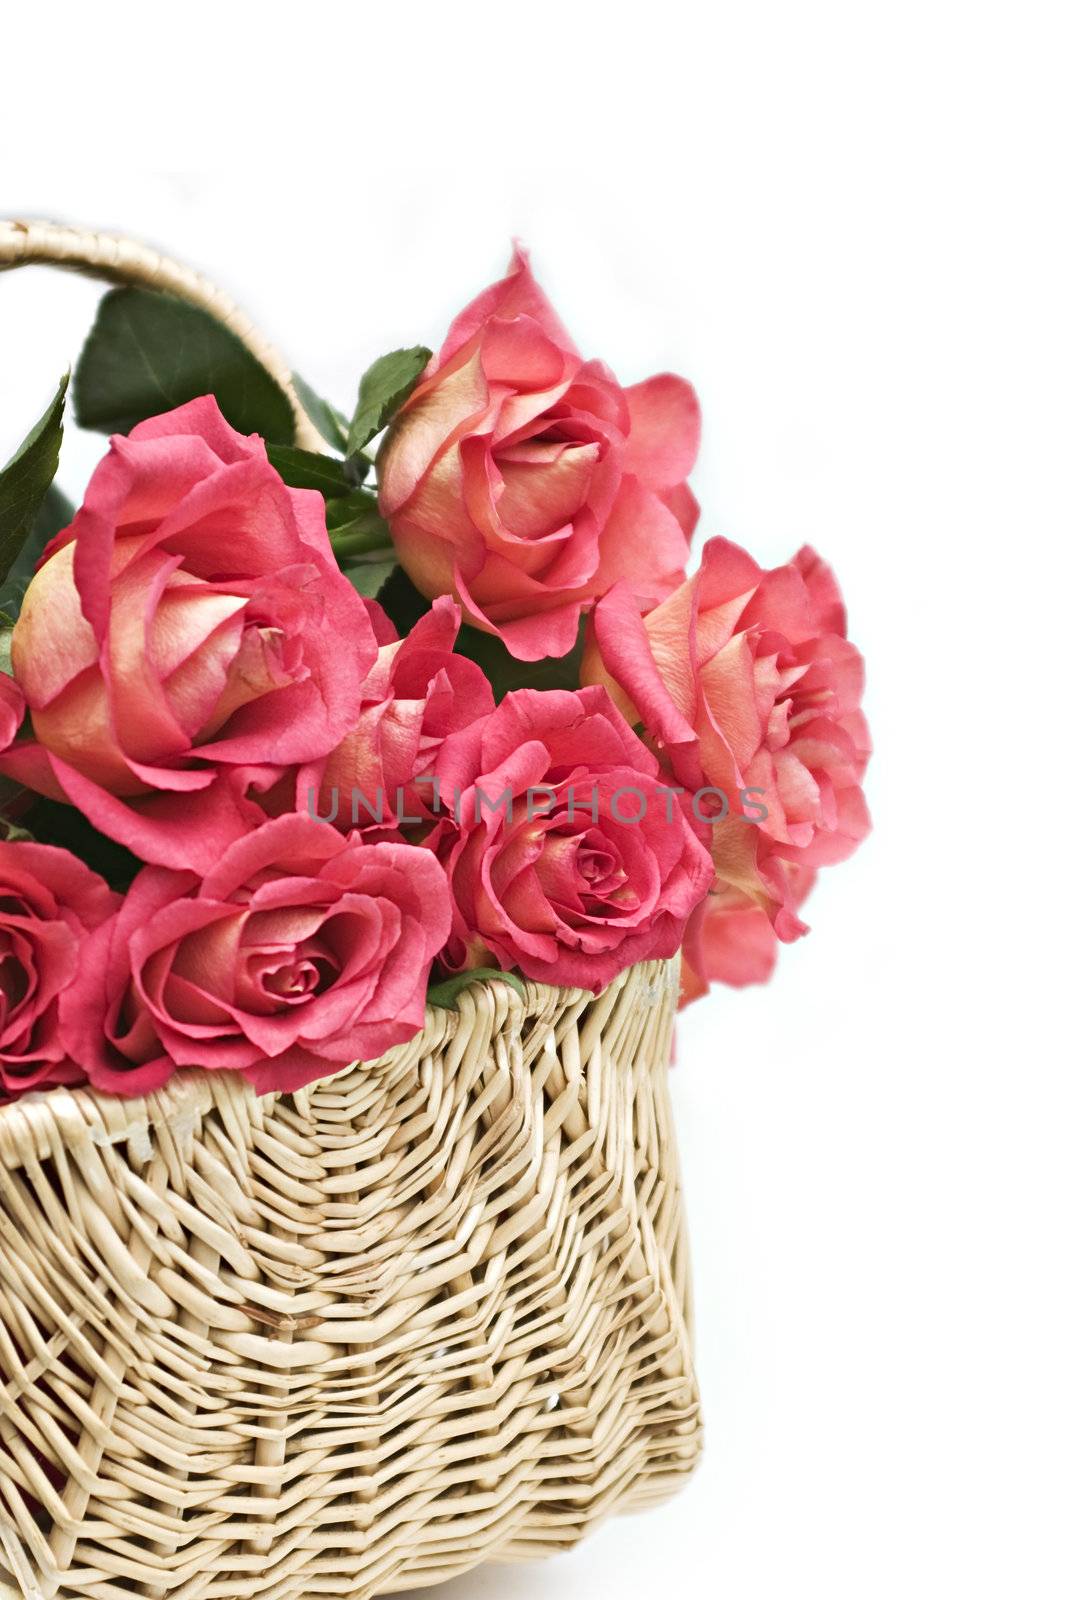 Long stem Peace roses in a basket by StephanieFrey